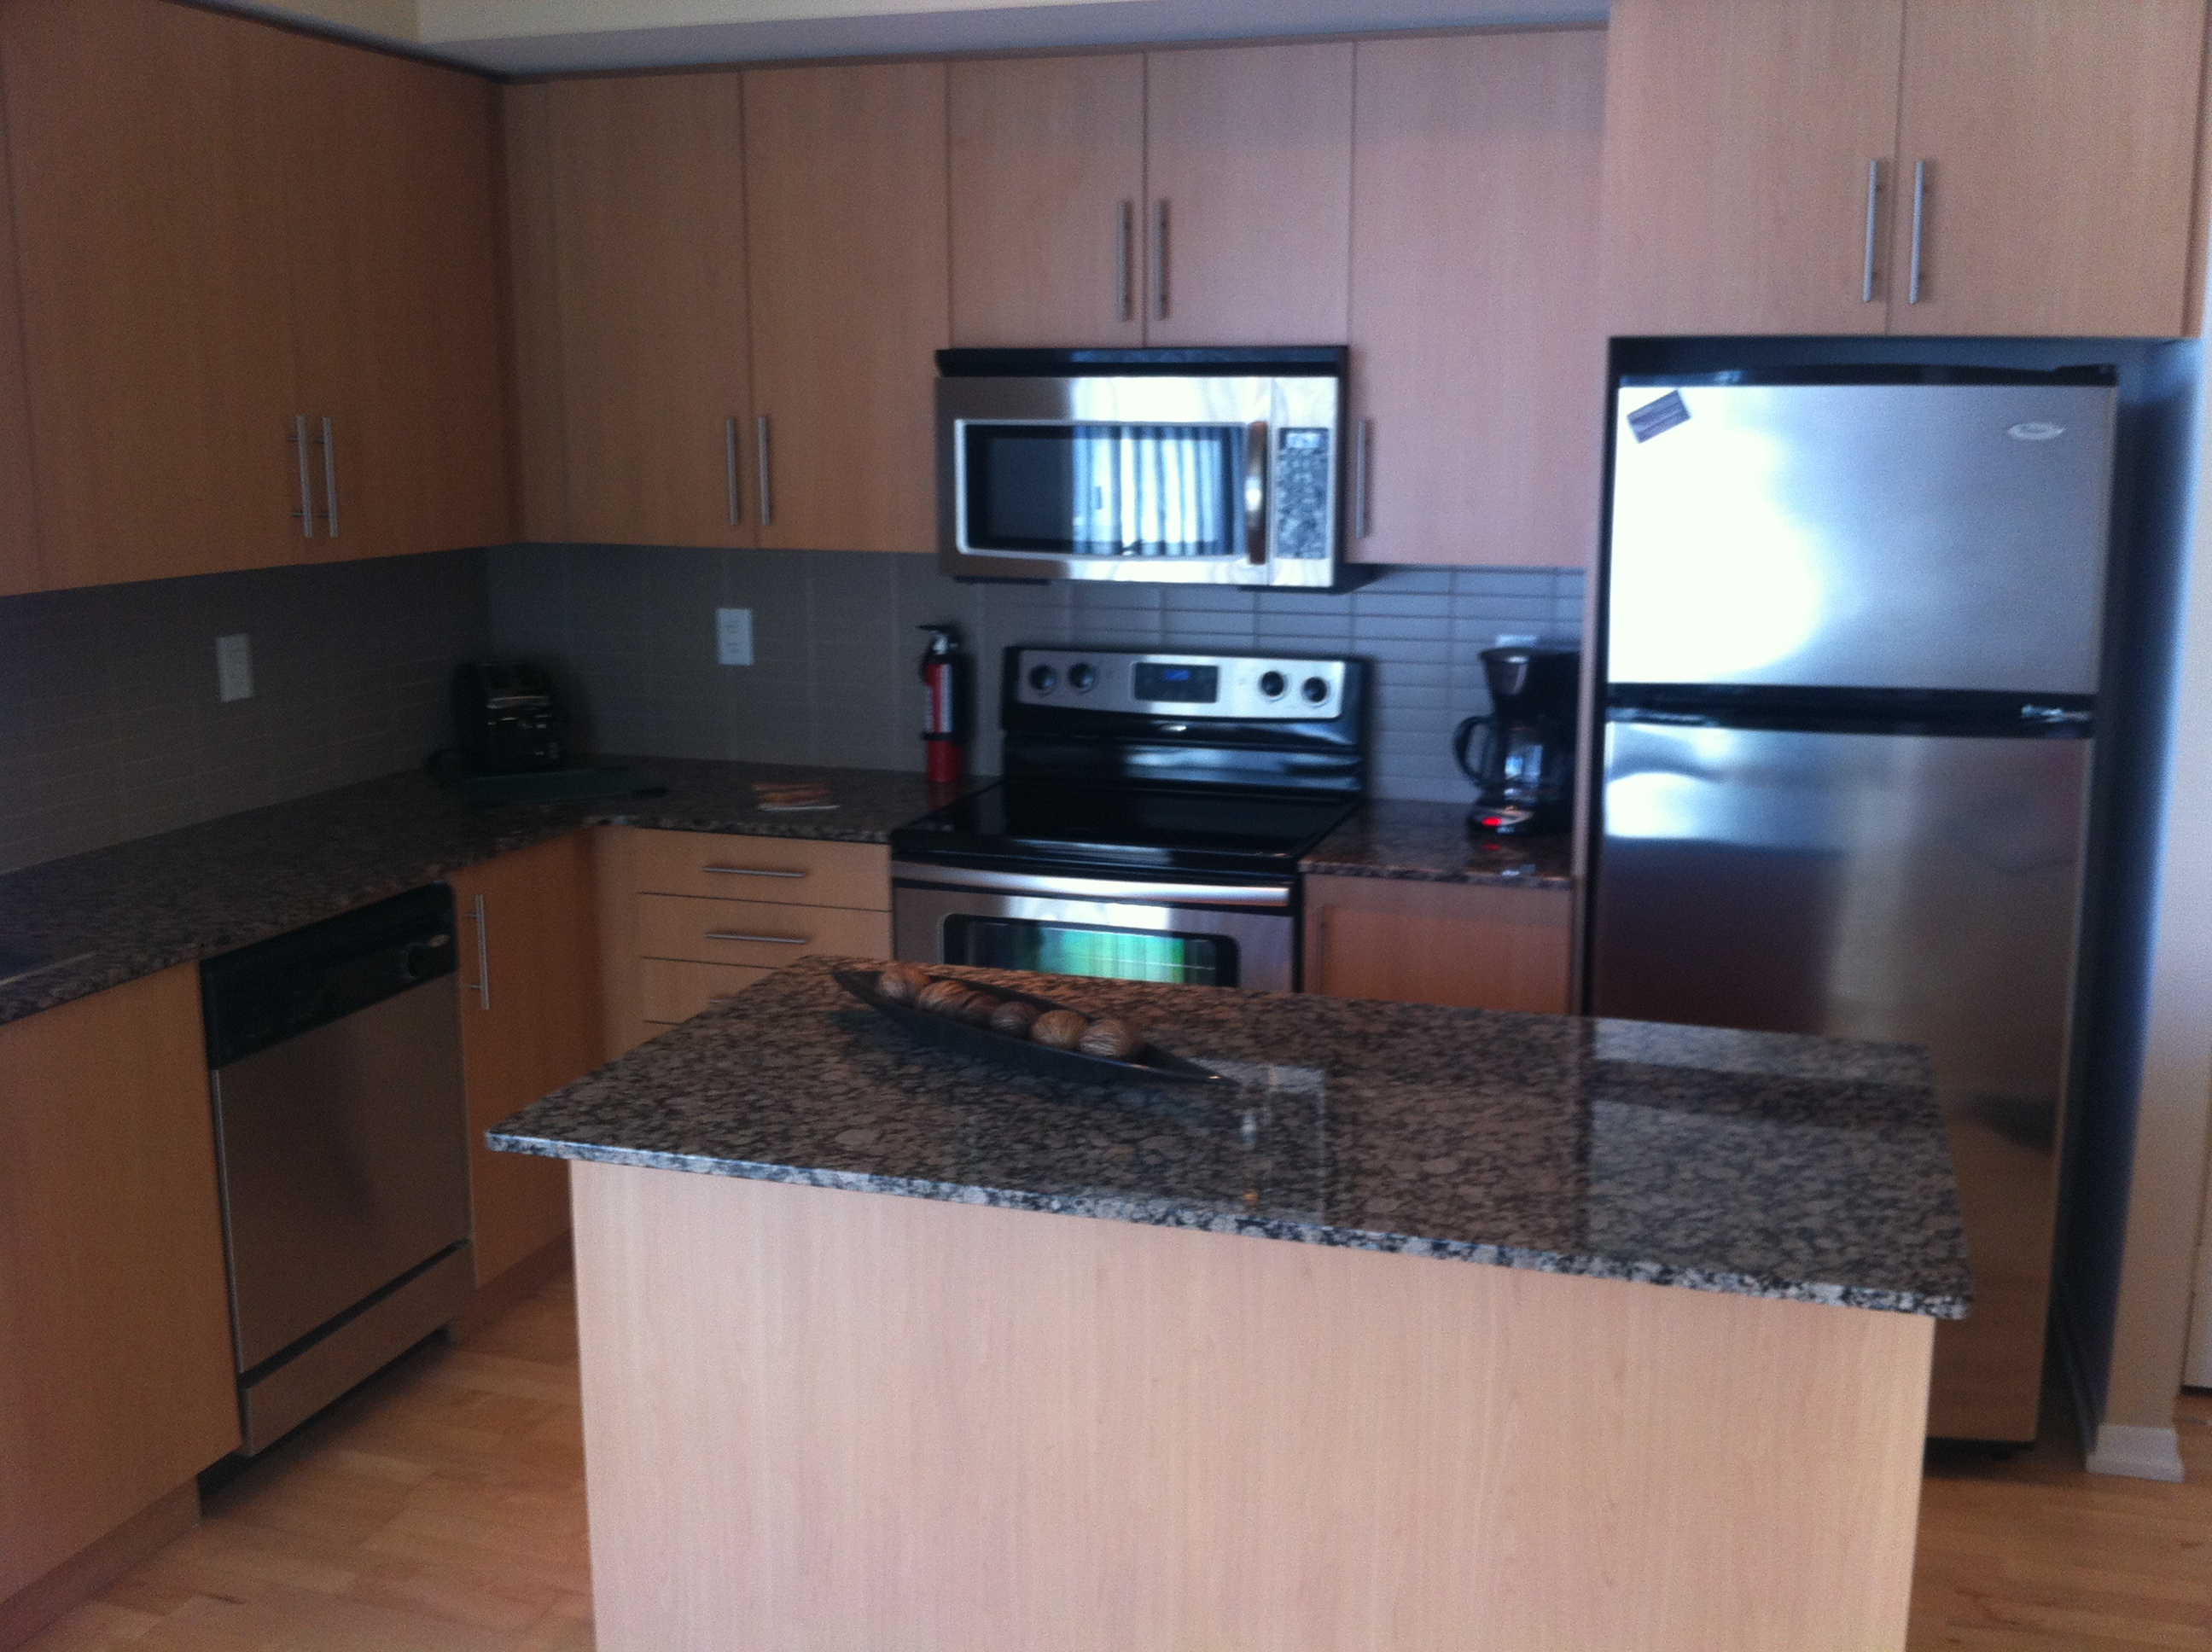 New Kitchens in all suites